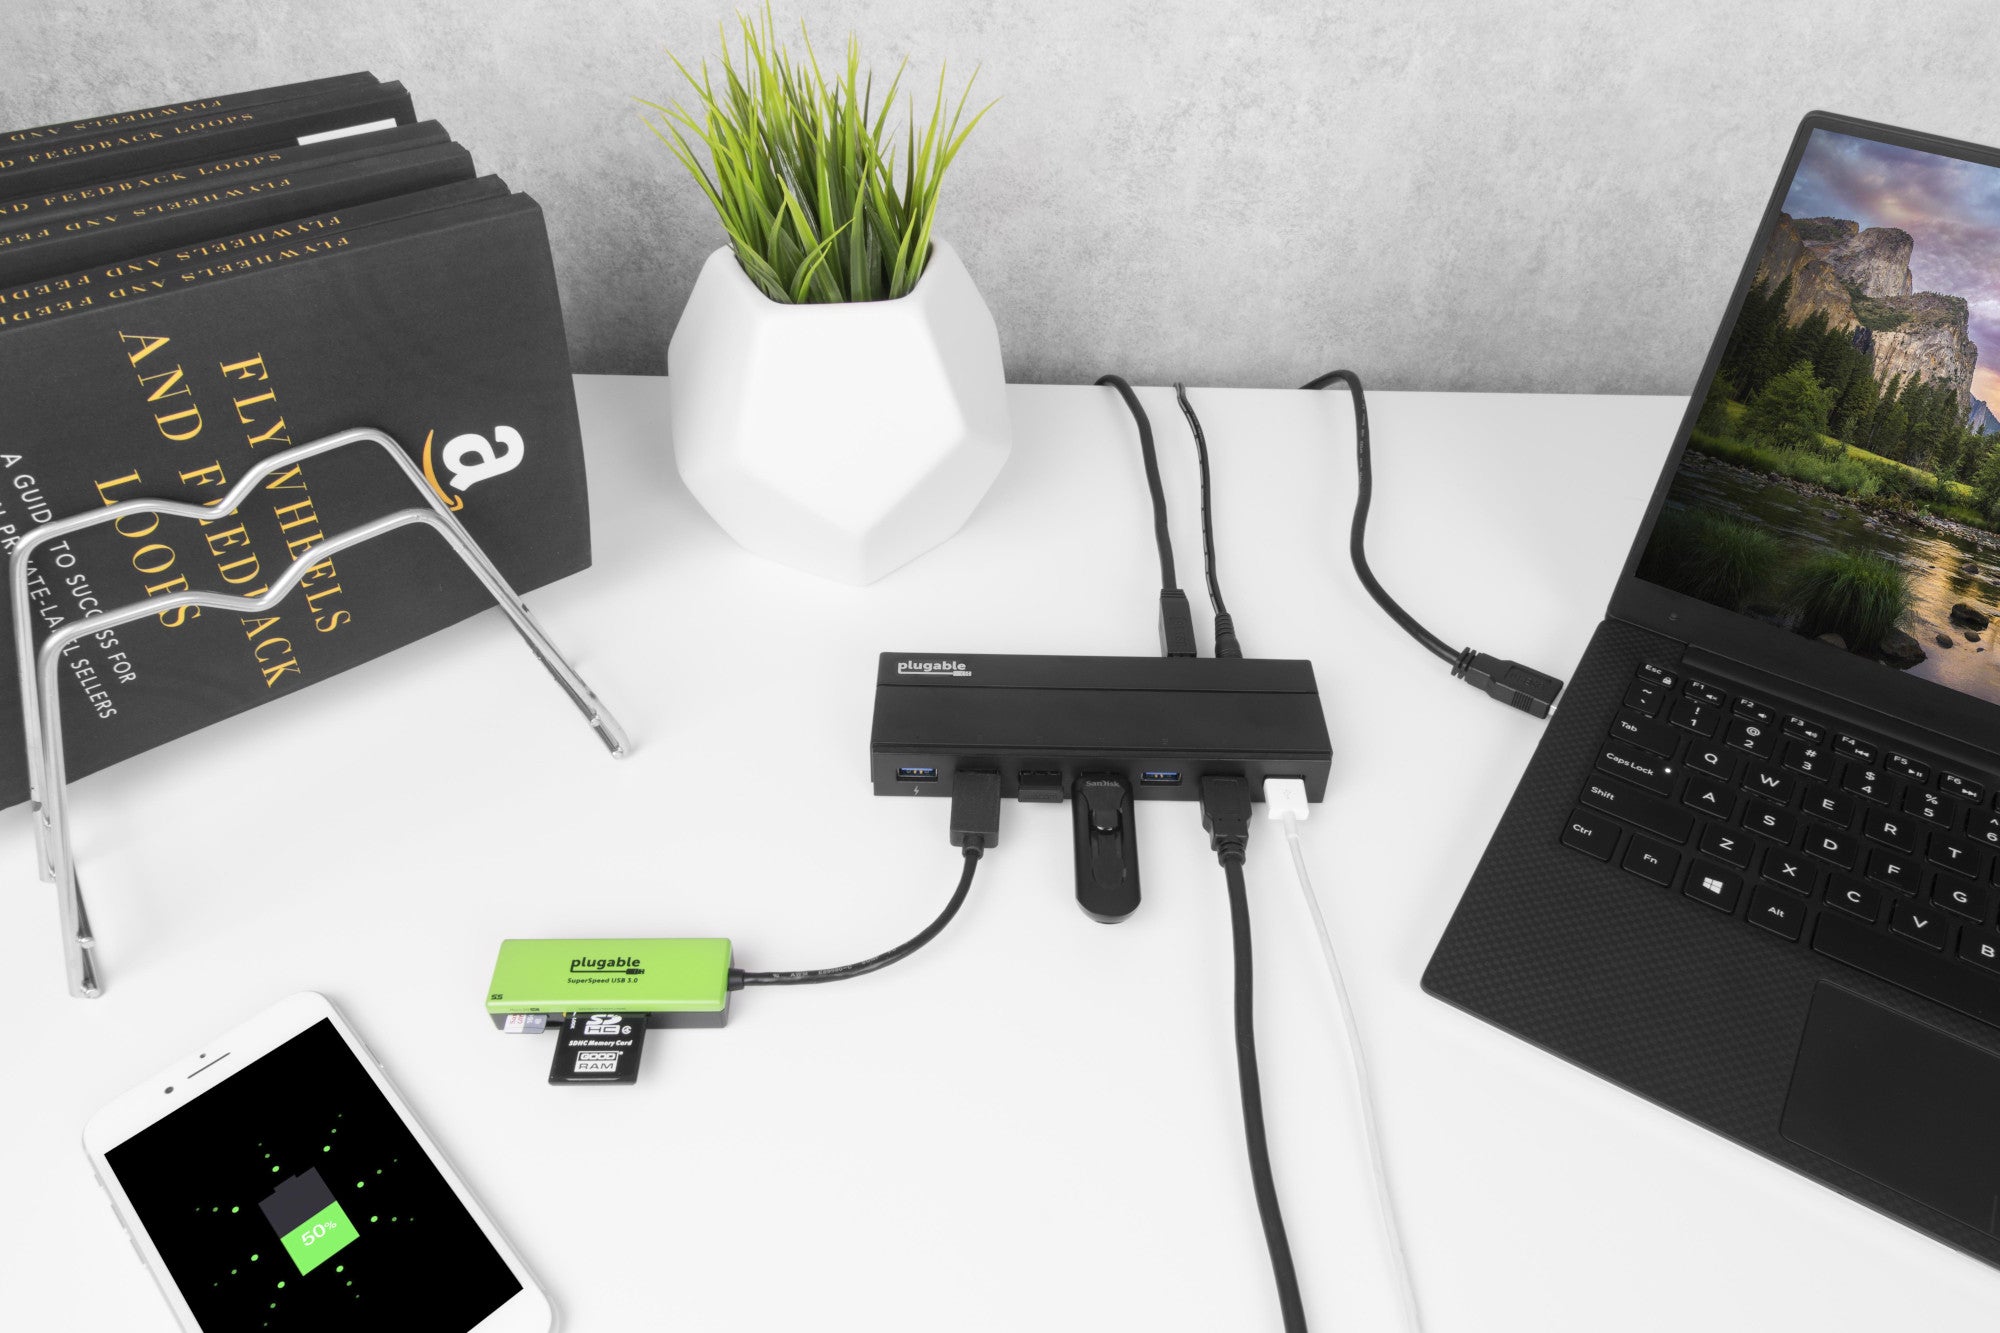 Gigacord USB 3.0 7-Port Powered Hub with Independent switch - NWCA Inc.